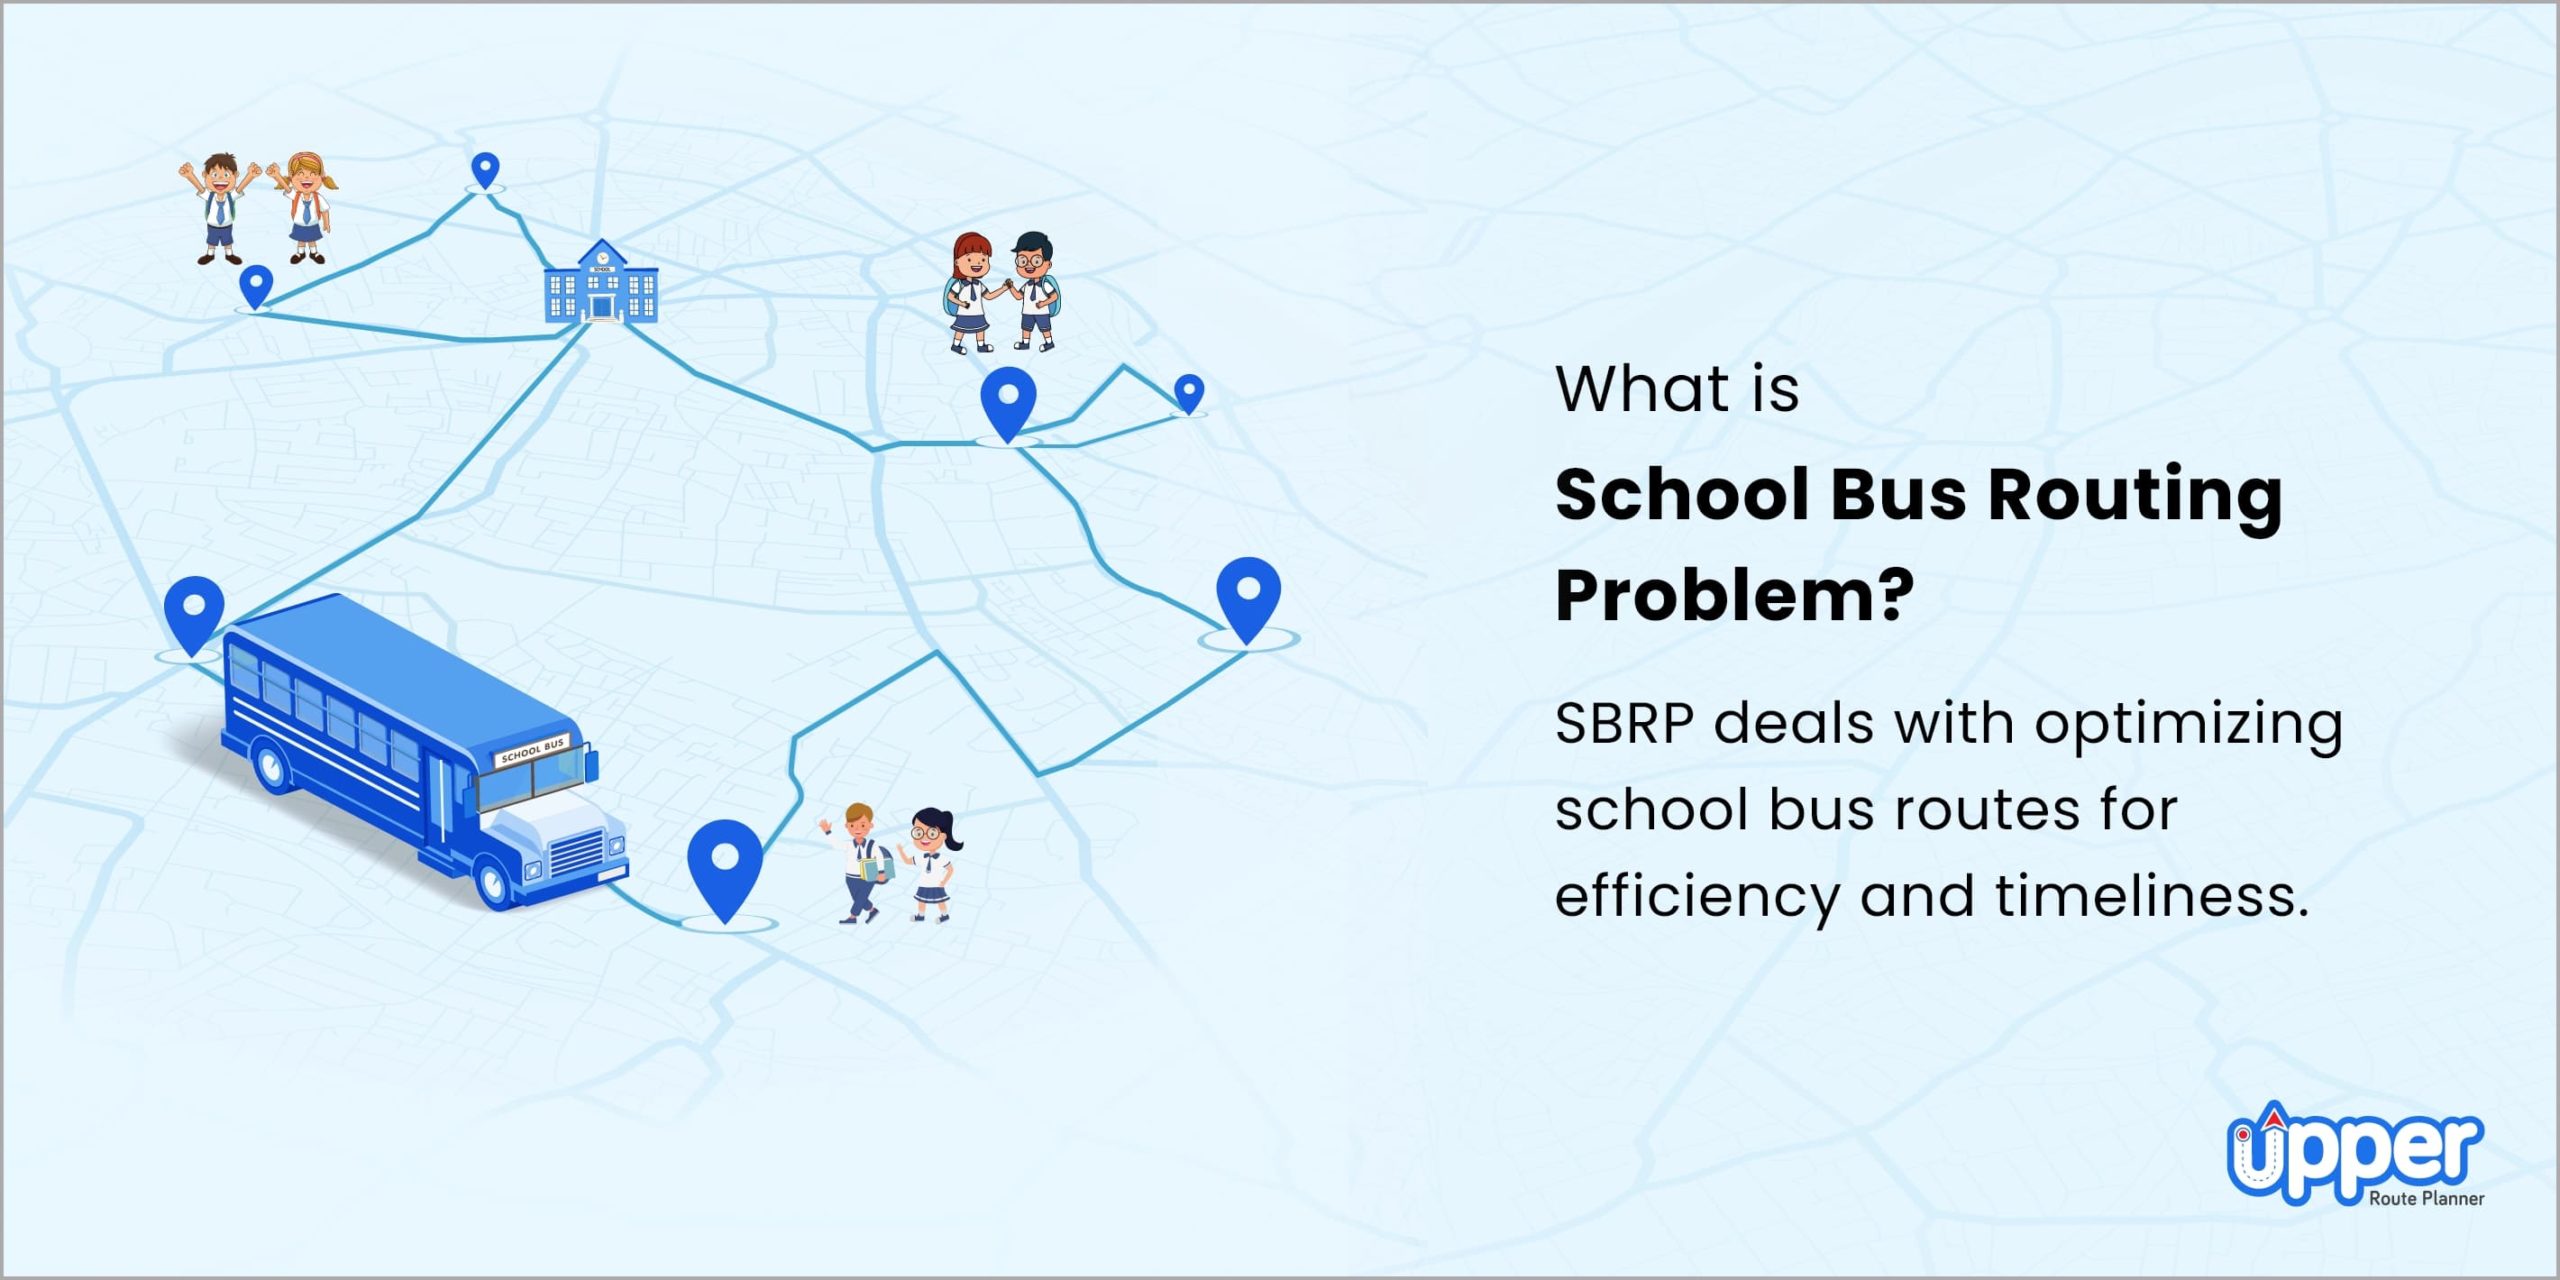 What is school bus routing problem